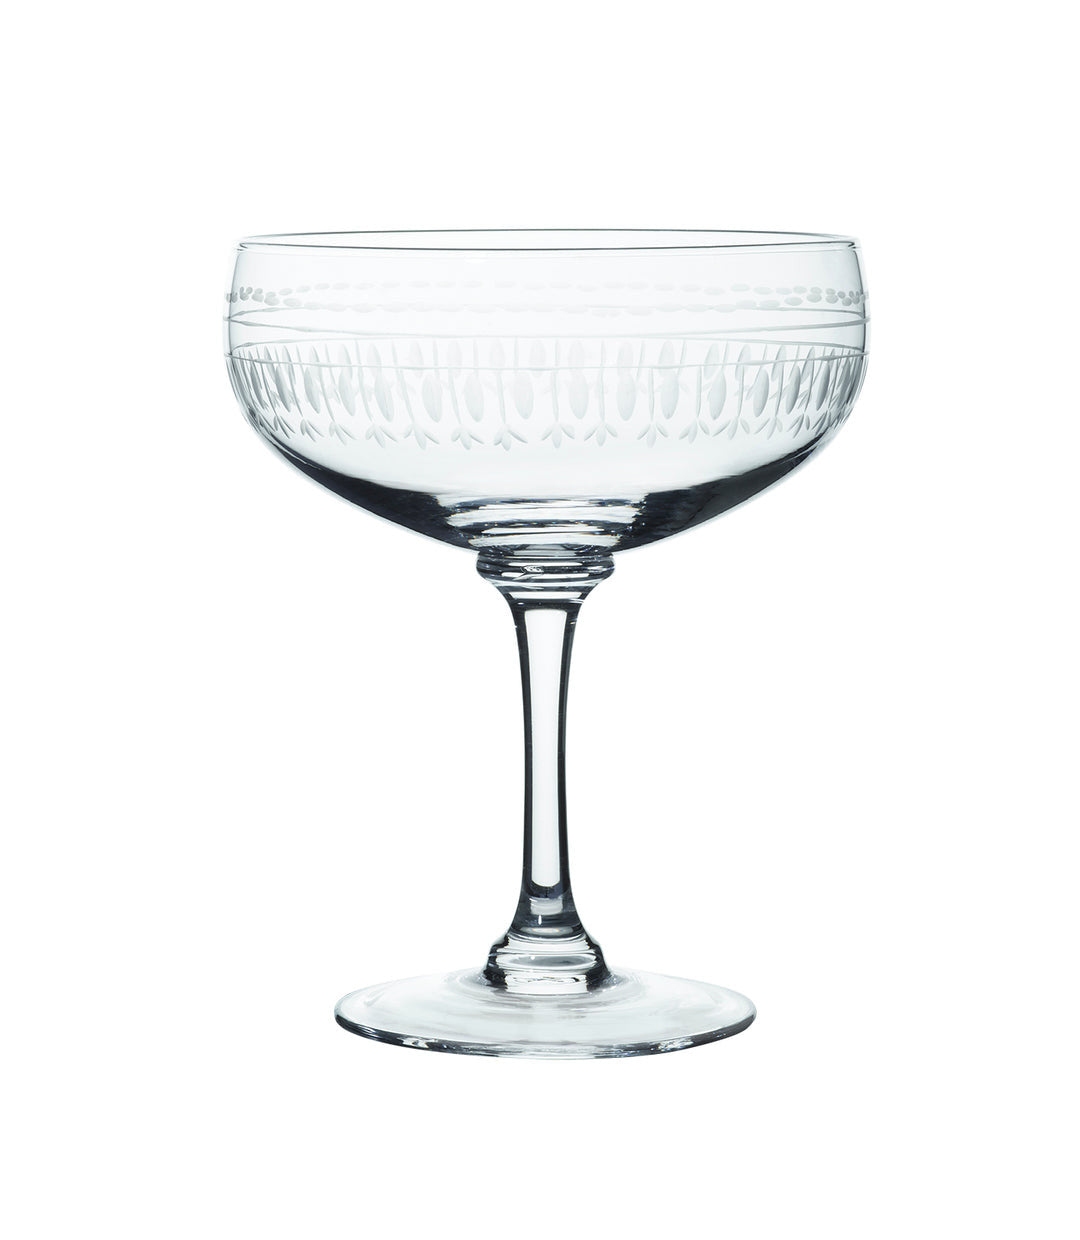 Cocktail Glass with Ovals Design by The Vintage List.